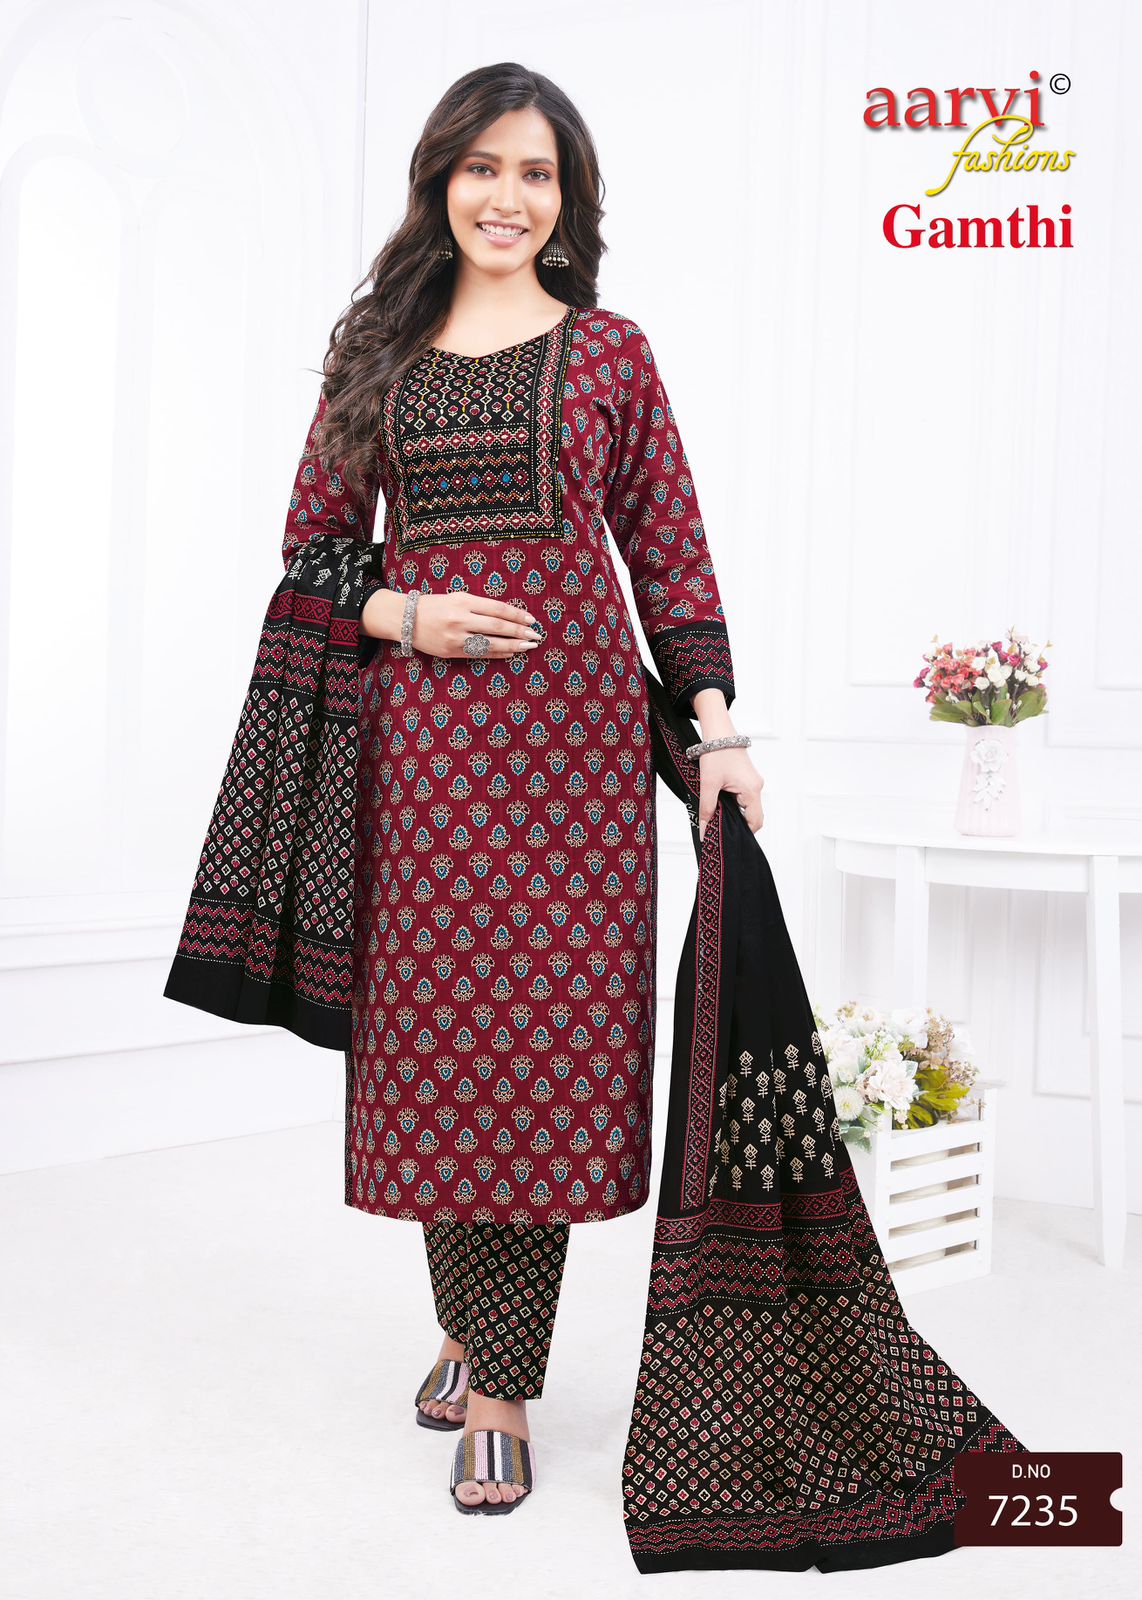 Gamthi Vol 3 Aarvi Fashions Cotton Readymade Pant Style Suits